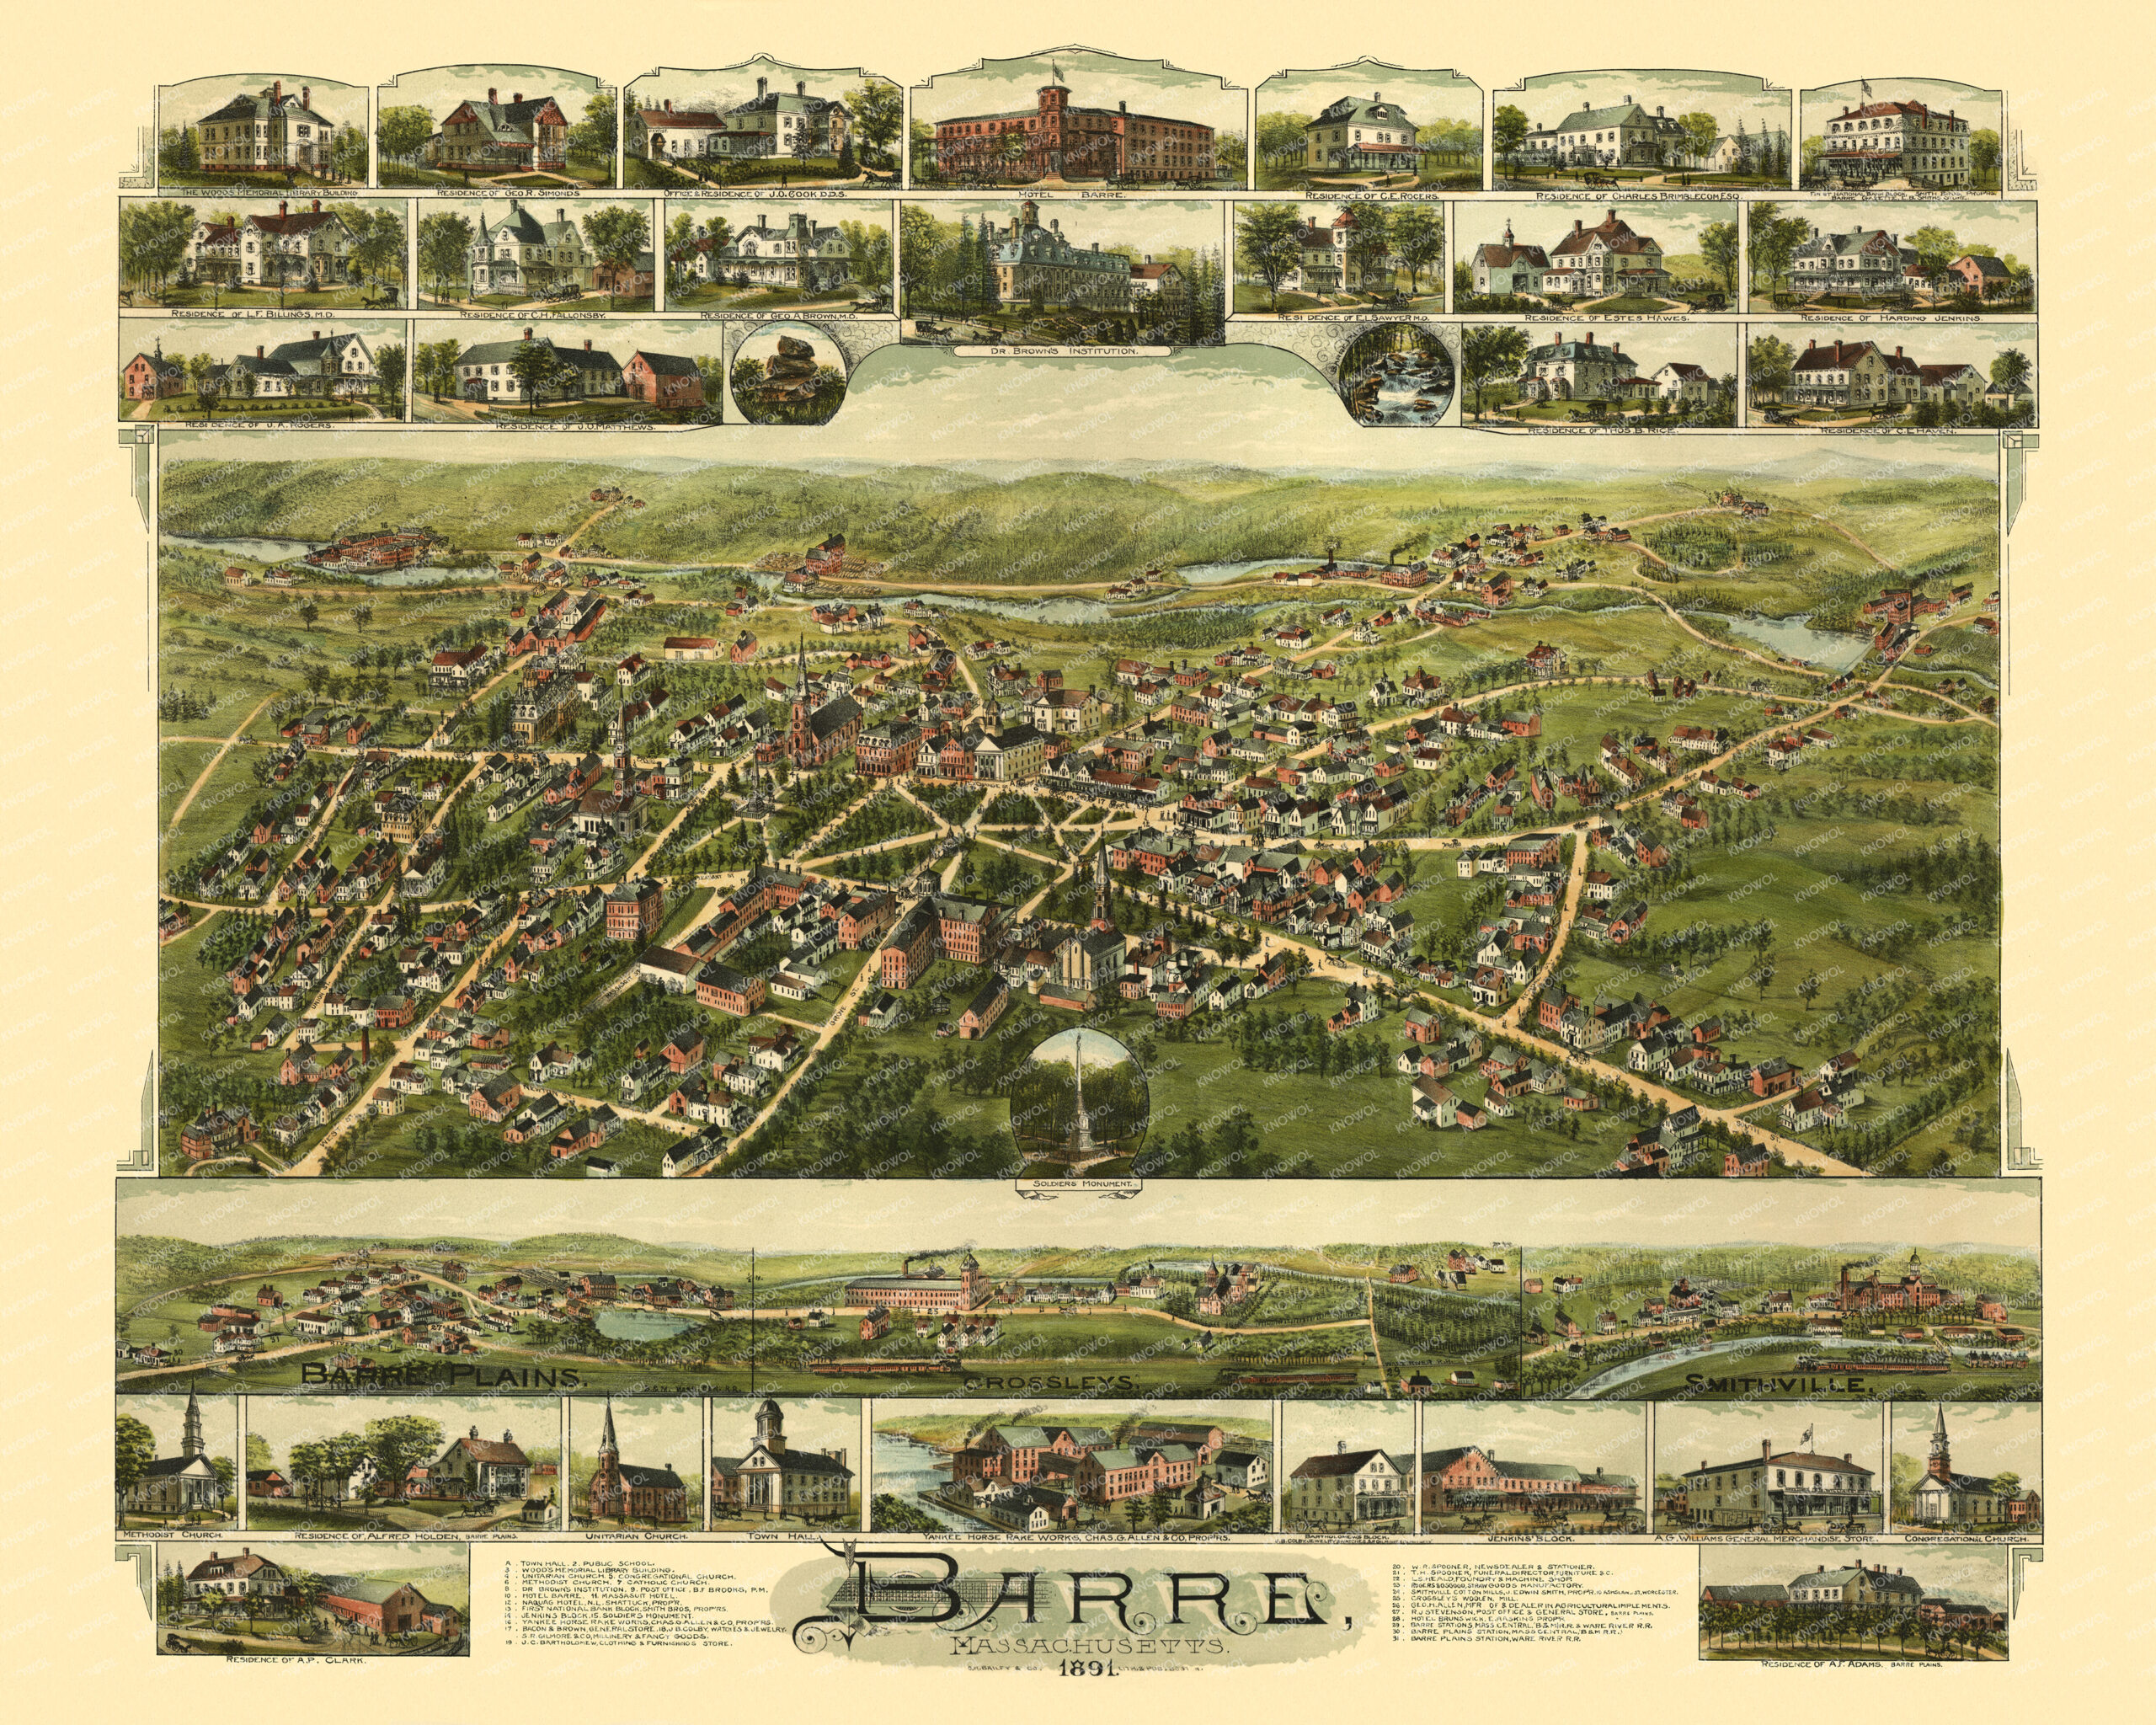 A bird's-eye view map of Barre, Massachusetts in 1891. It shows the town's layout, including streets, buildings, and landmarks like the Barre Opera House and the Barre Public Library. The map also shows the town's many granite quarries, mills, and factories.